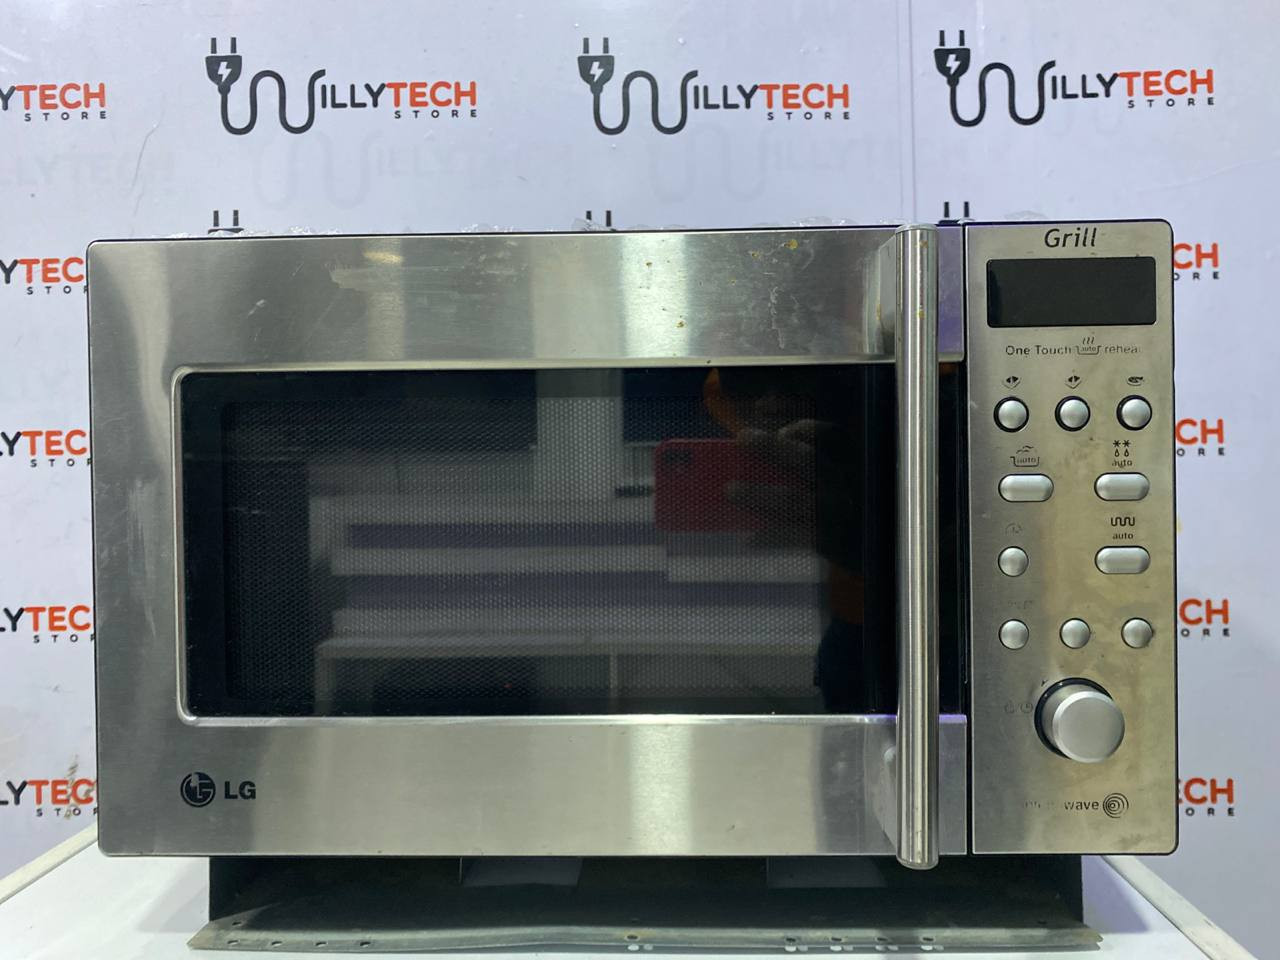 LG Microwave +Grill